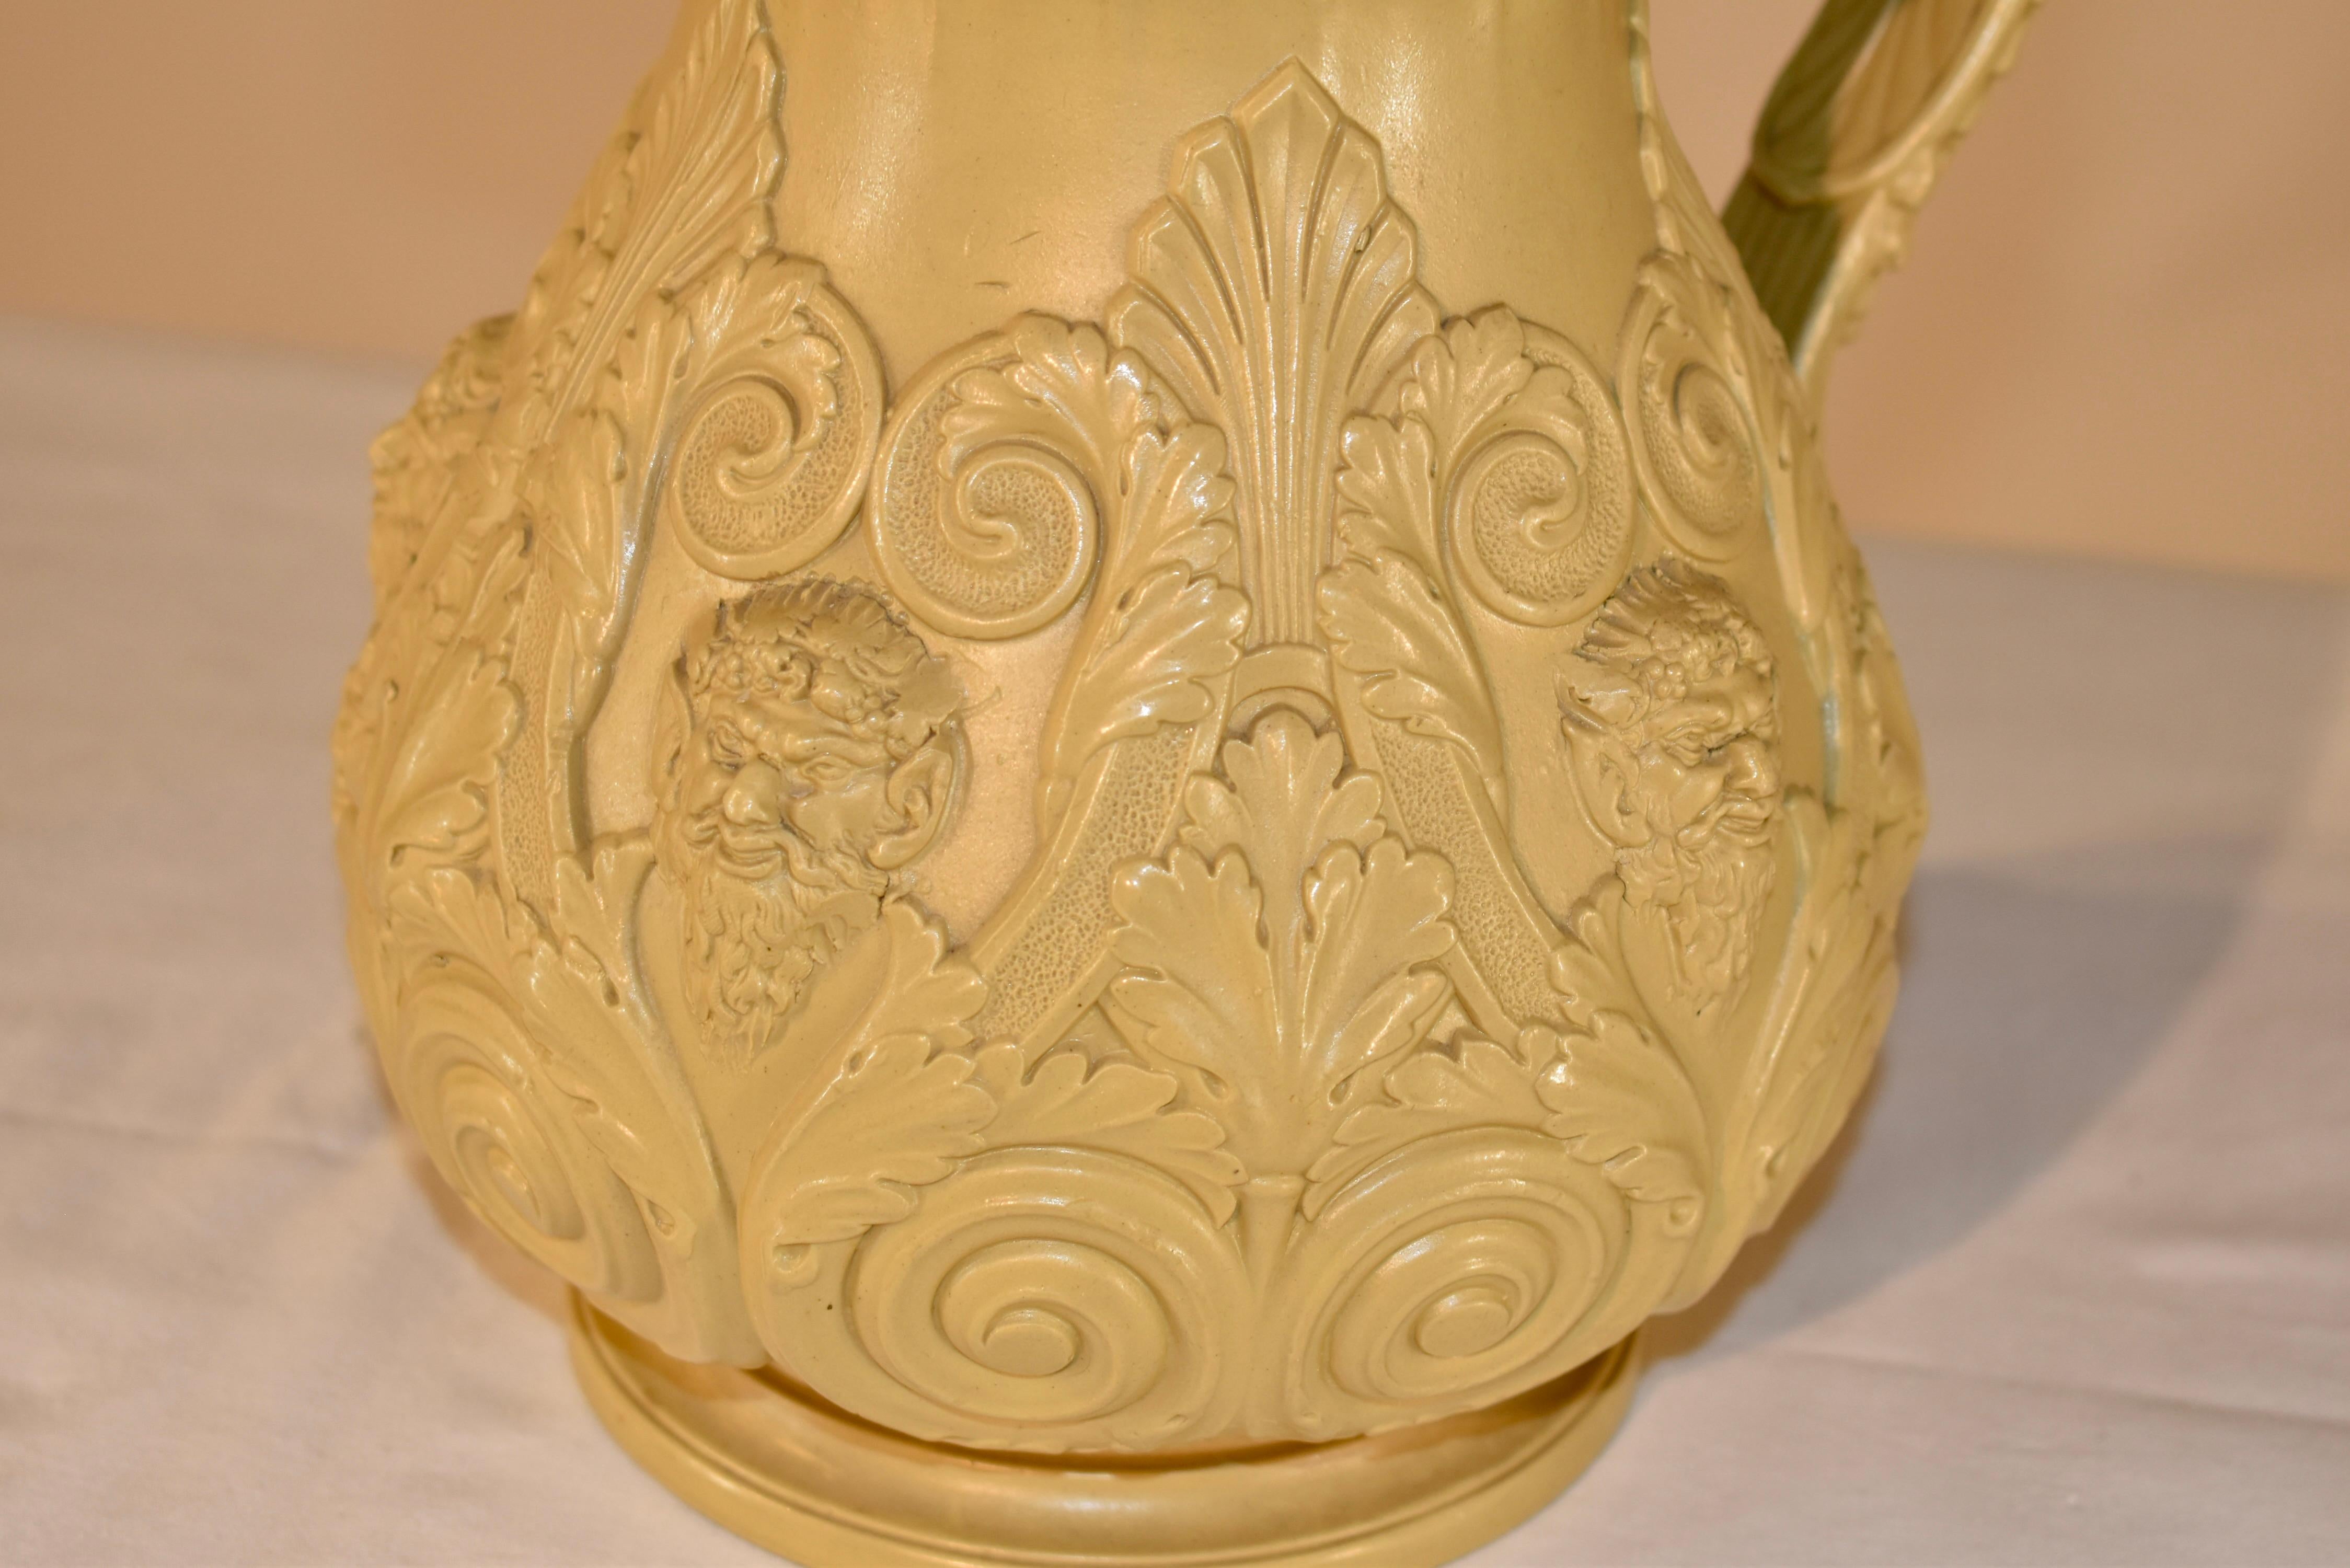 19th Century Ridgway Drabware Jug In Good Condition For Sale In High Point, NC